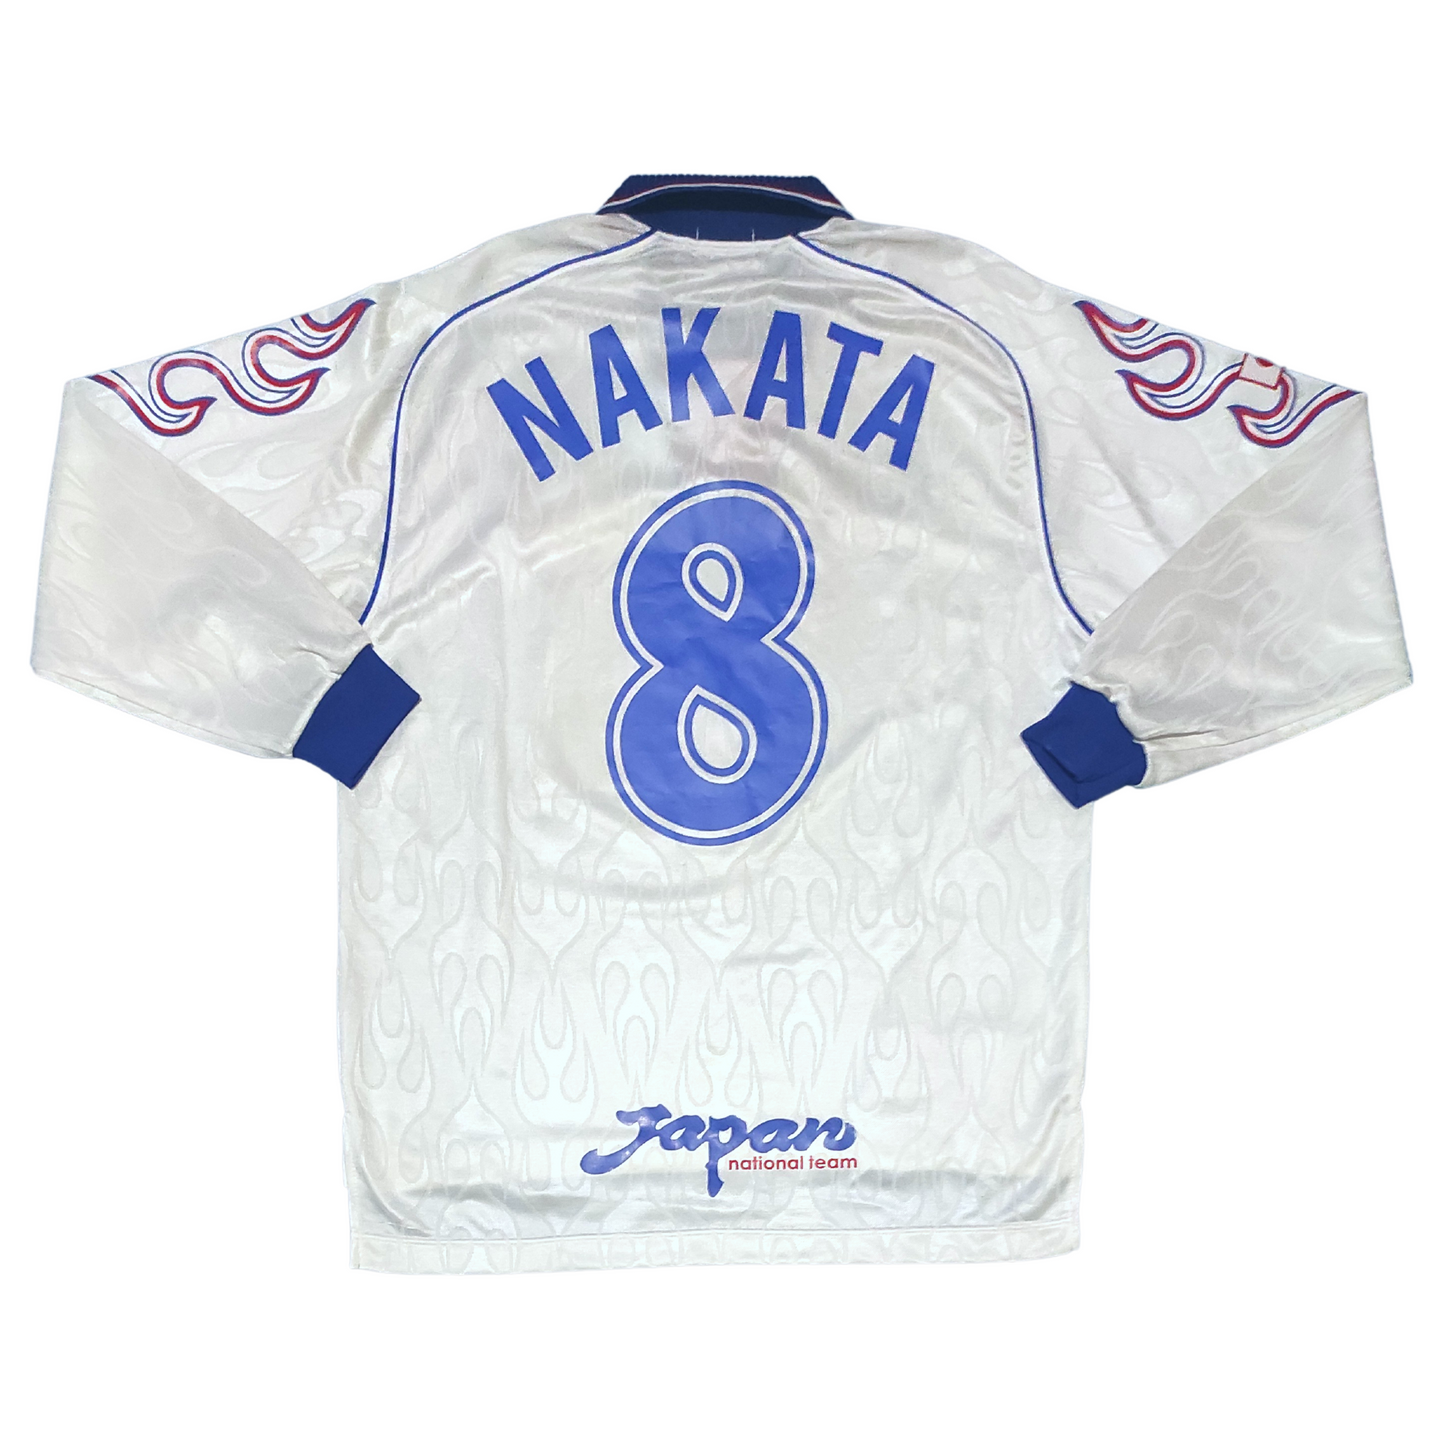 Japan Away L/S Player Issue Shirt 1998 Nakata (L)